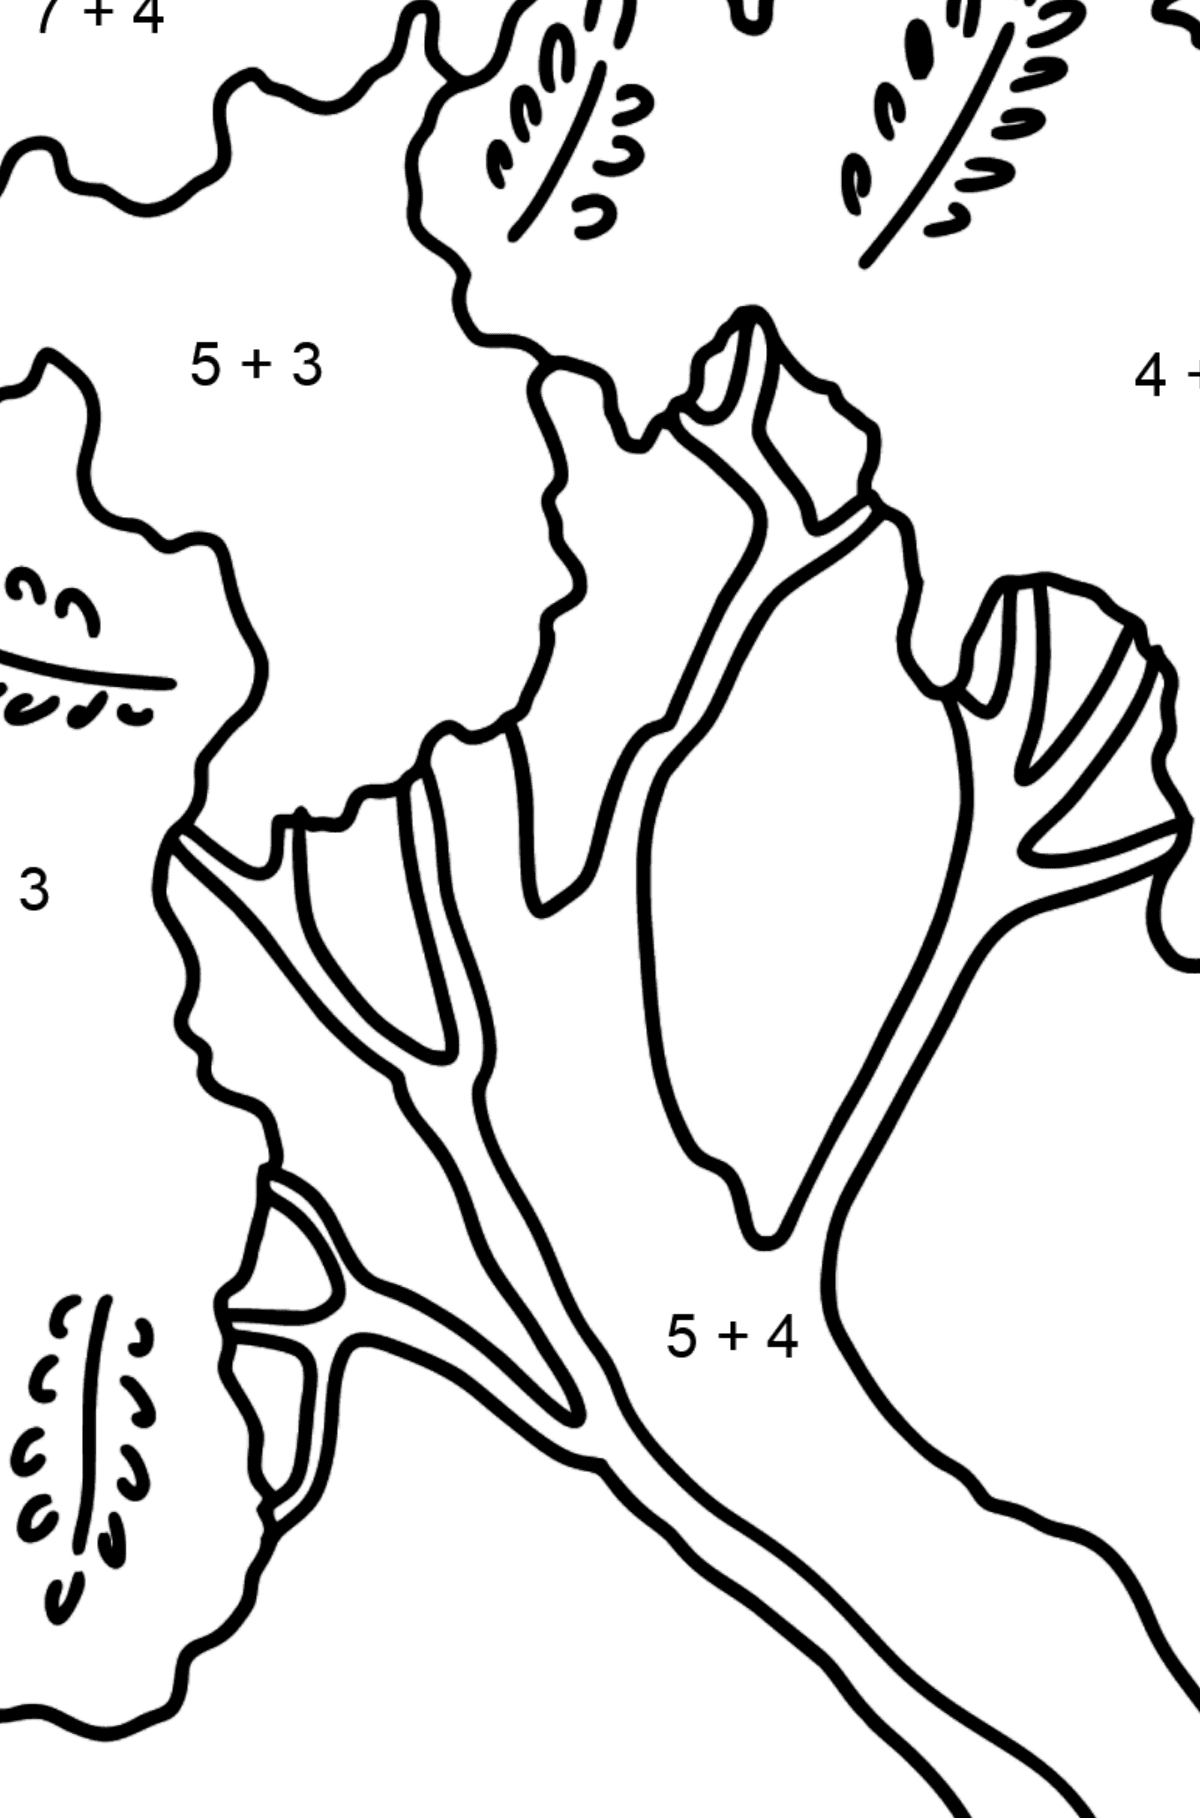 Acacia coloring page - Math Coloring - Addition for Kids